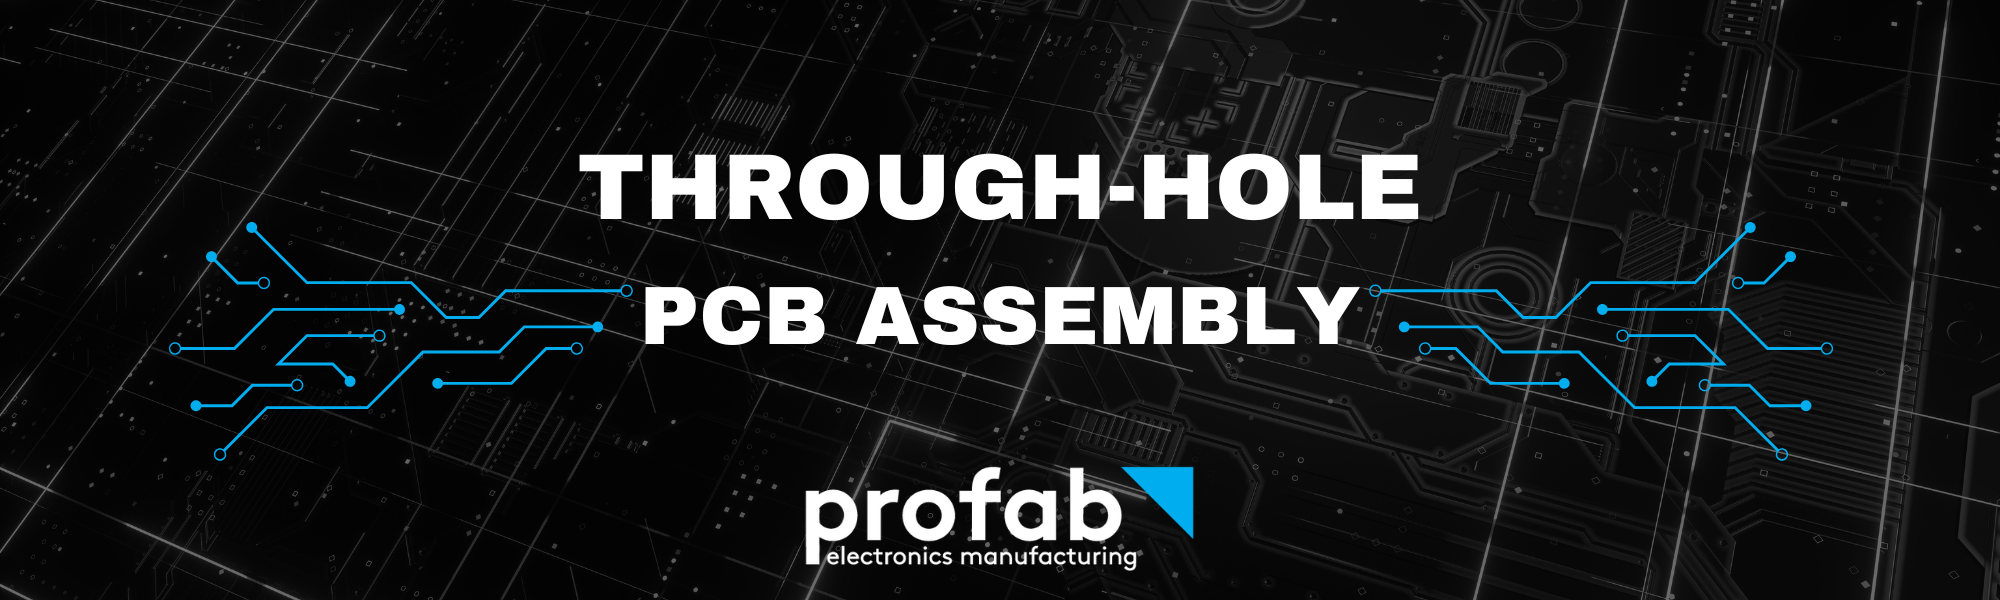 Through-Hole PCB Assembly